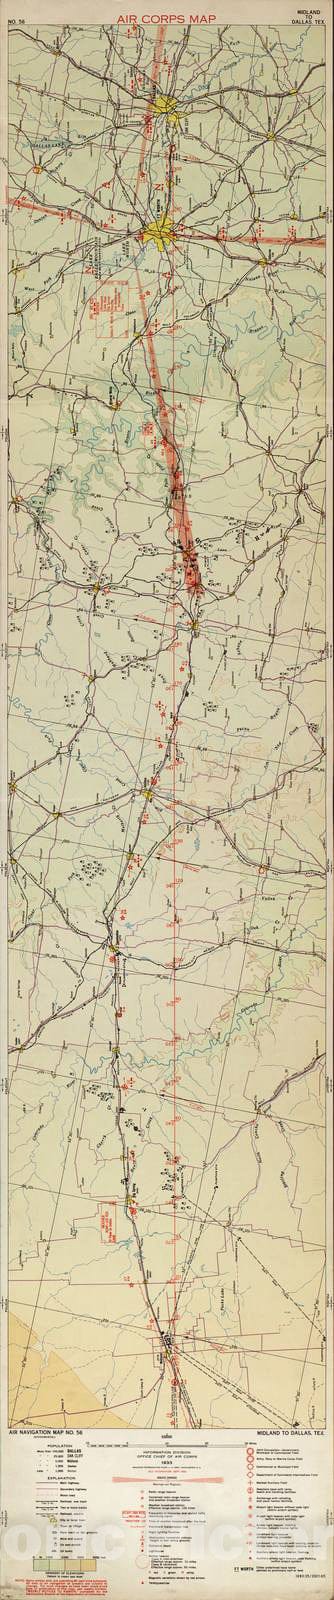 Historic 1924 Map - Aeronautical Strip maps of The United States. - No. 56, 1933 - rev. Sept. 1933 - Air Corps map